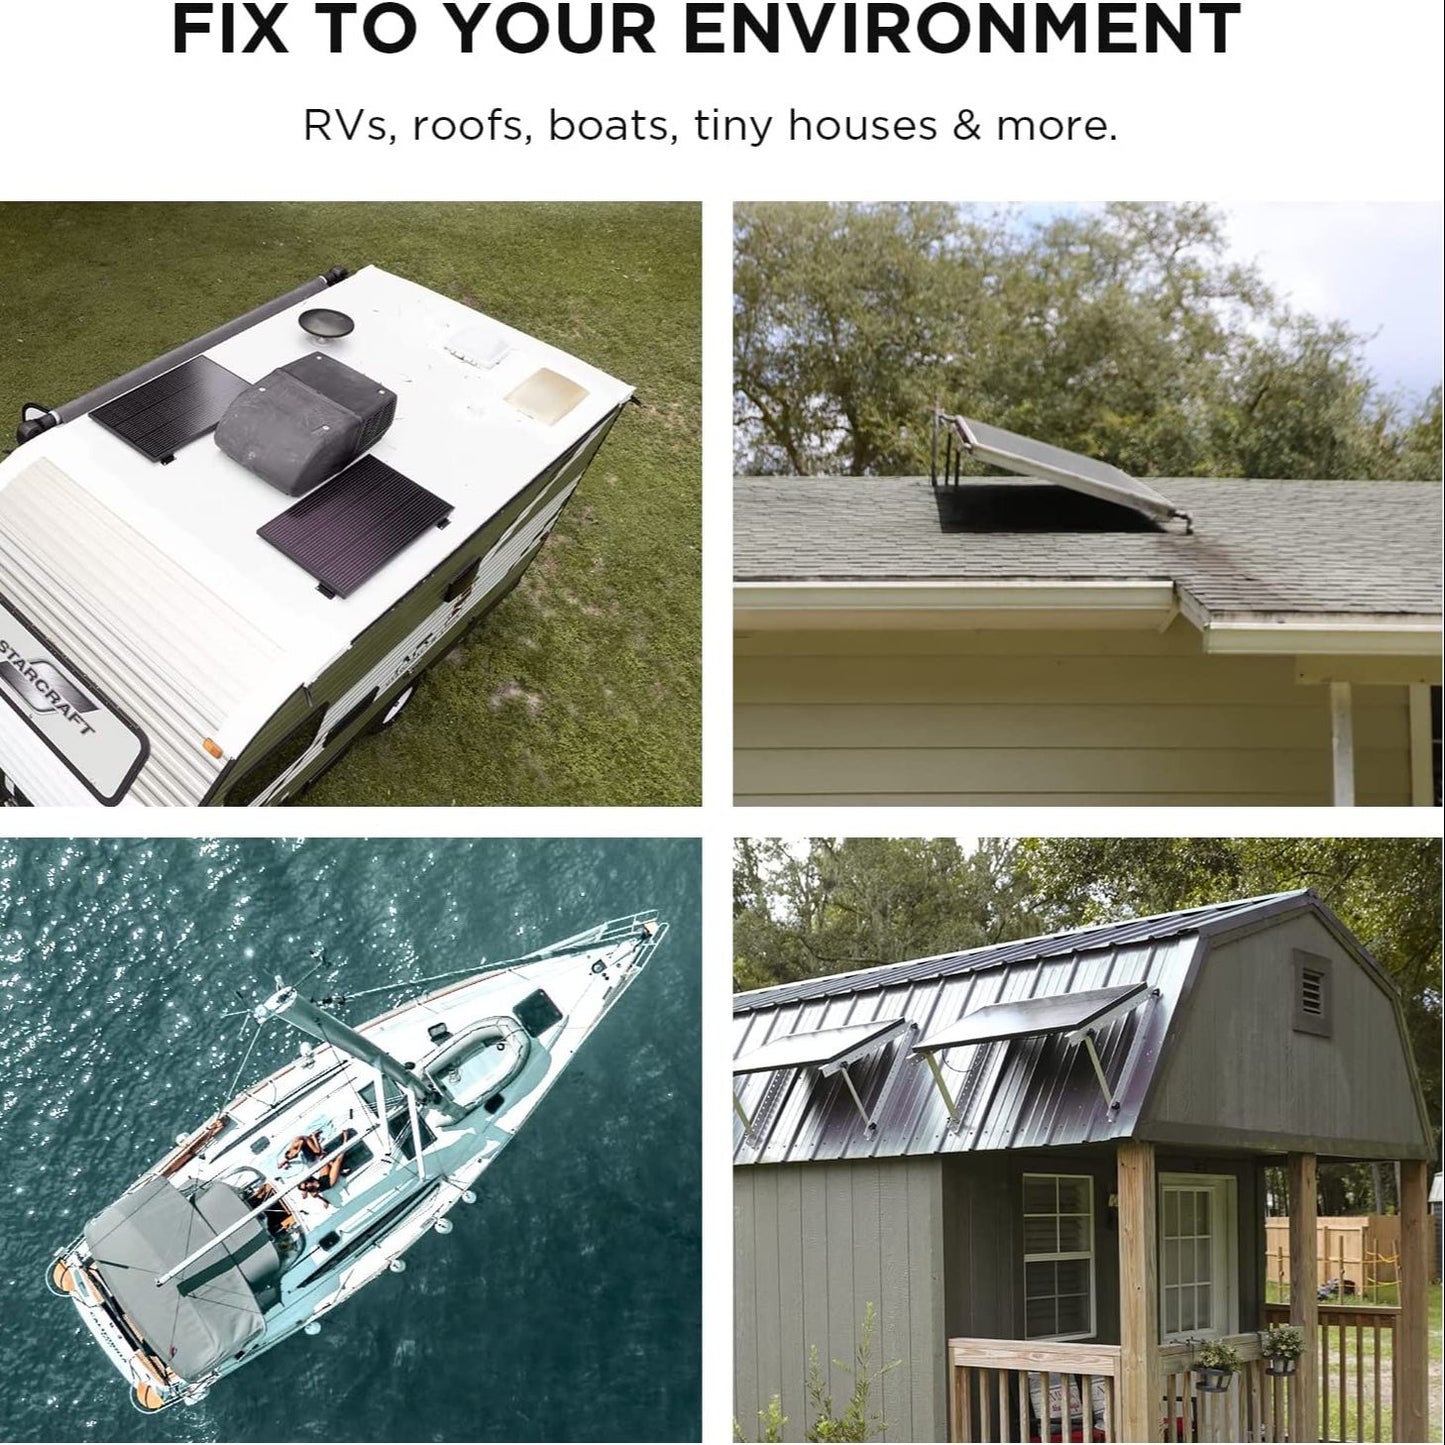 RVs, roofs, boats, tiny houses & more: